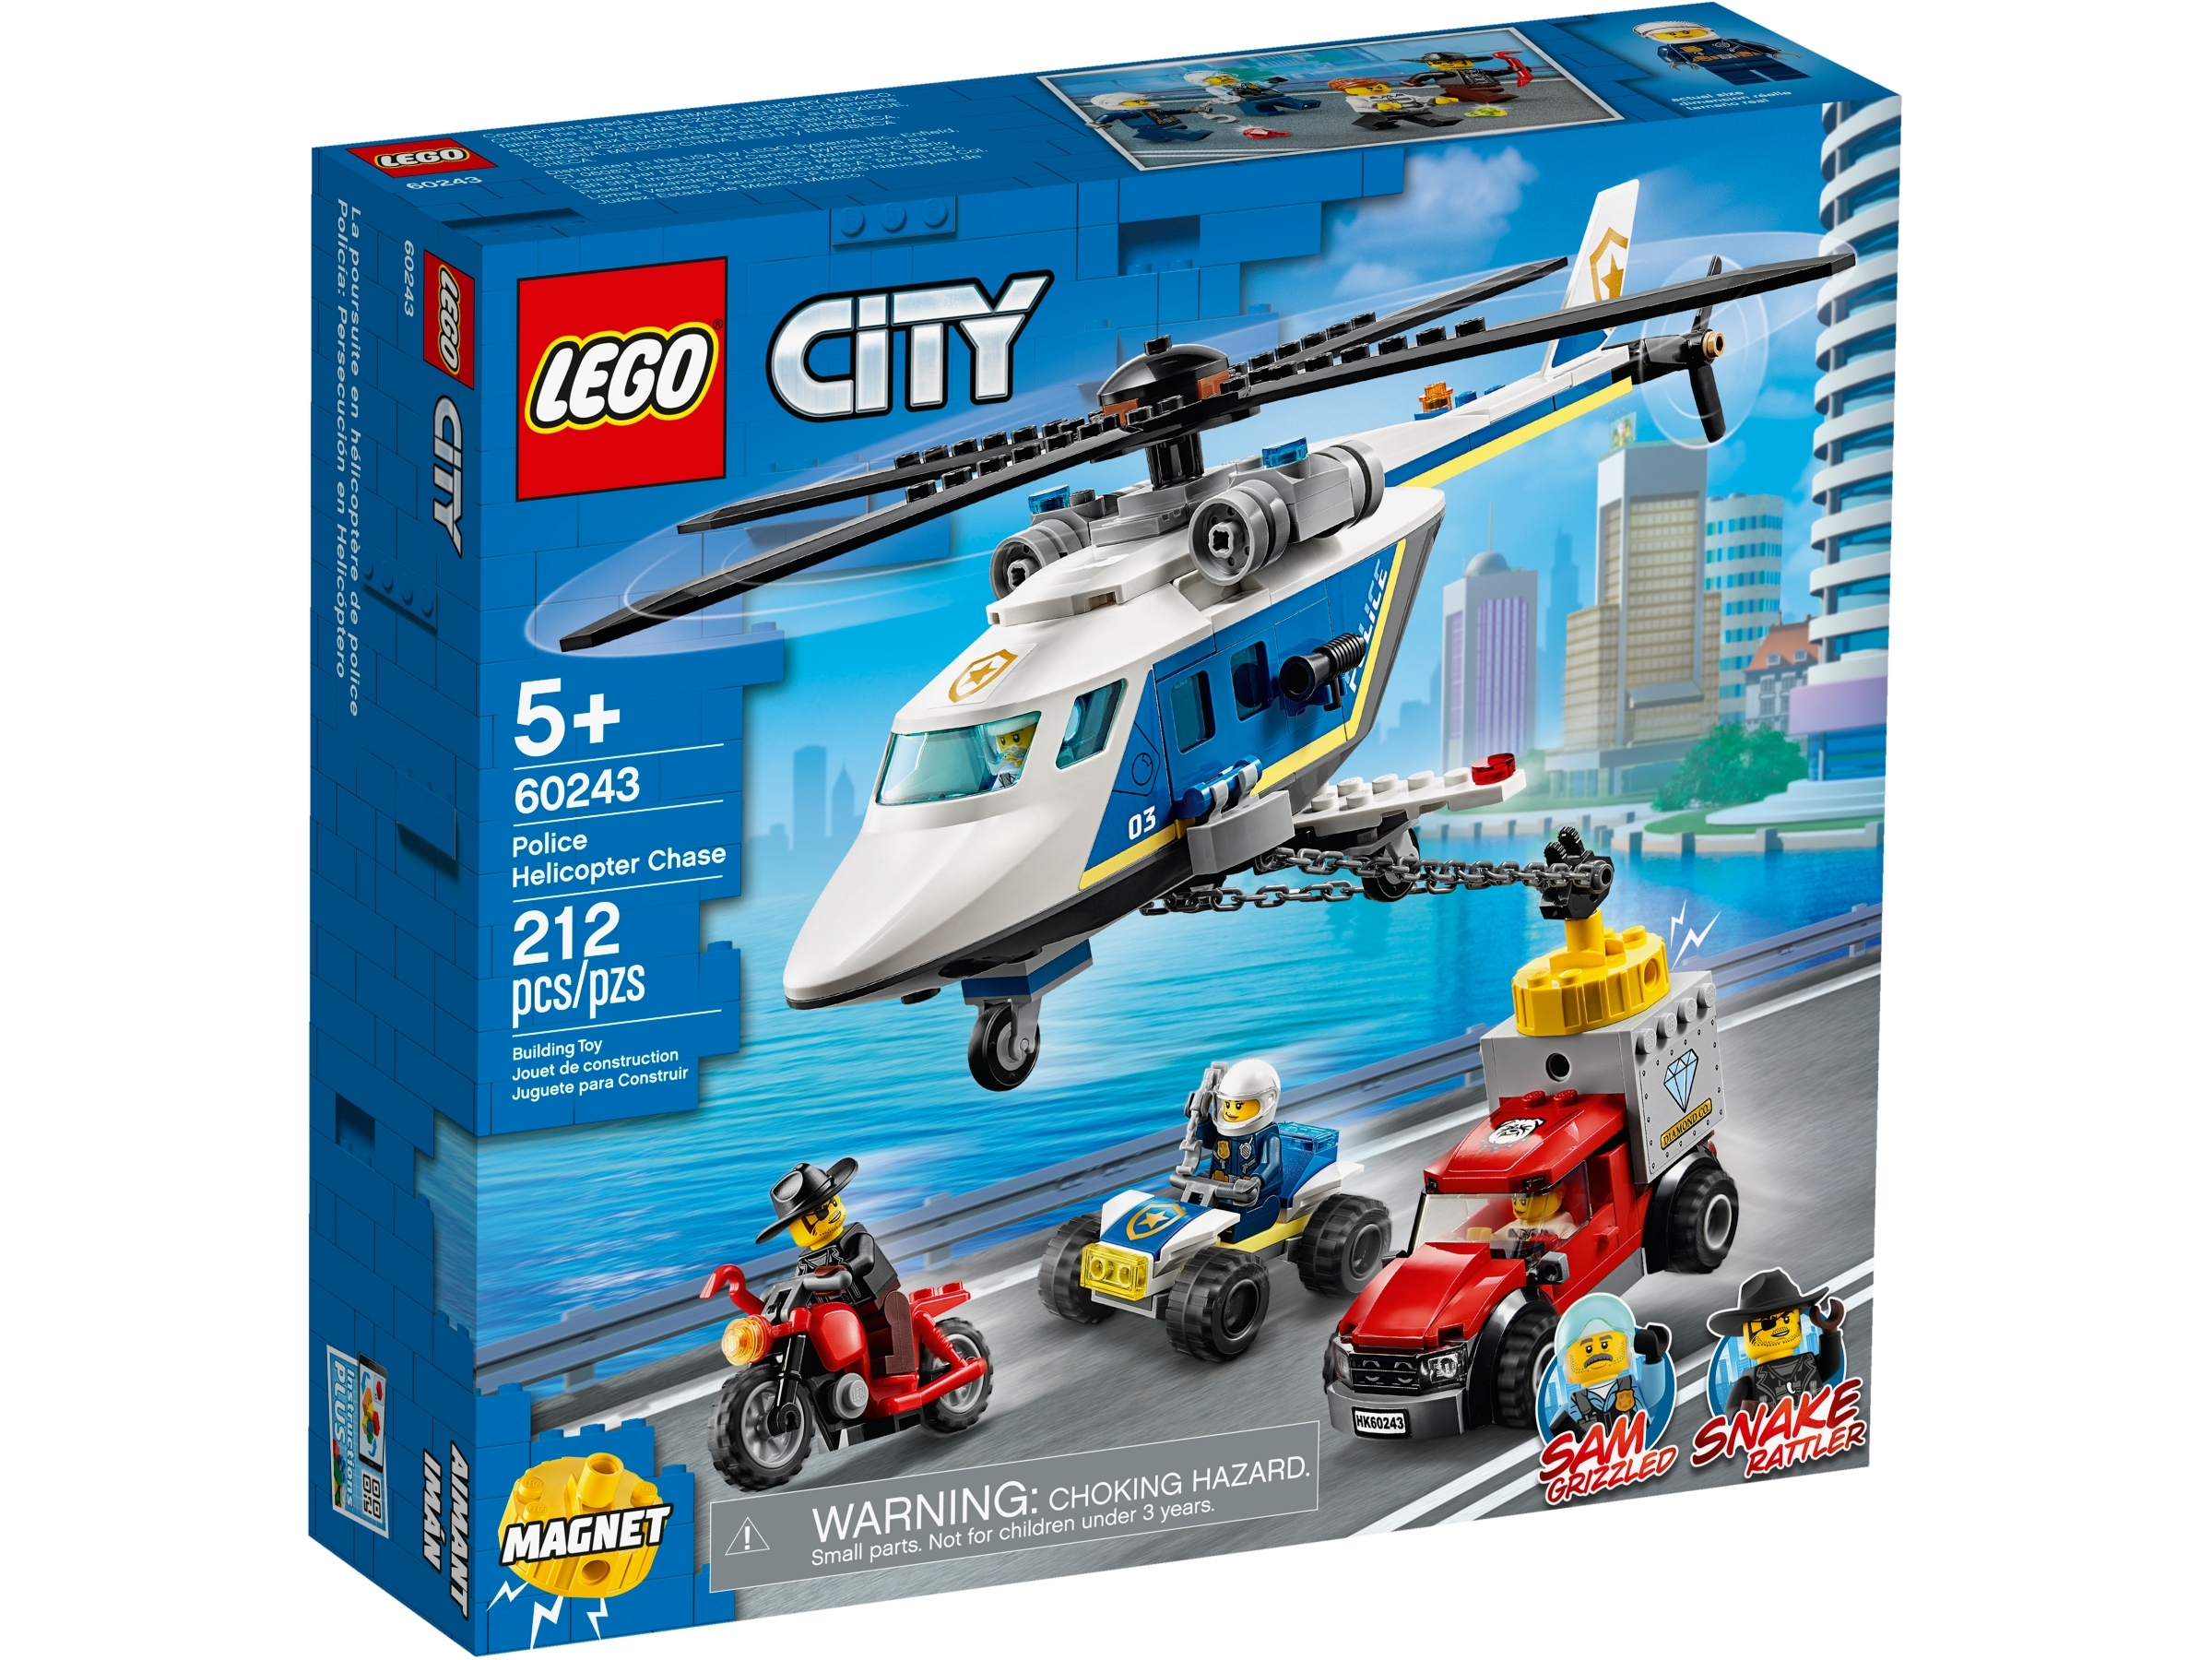 60013 for sale online LEGO City Coast Guard Helicopter 